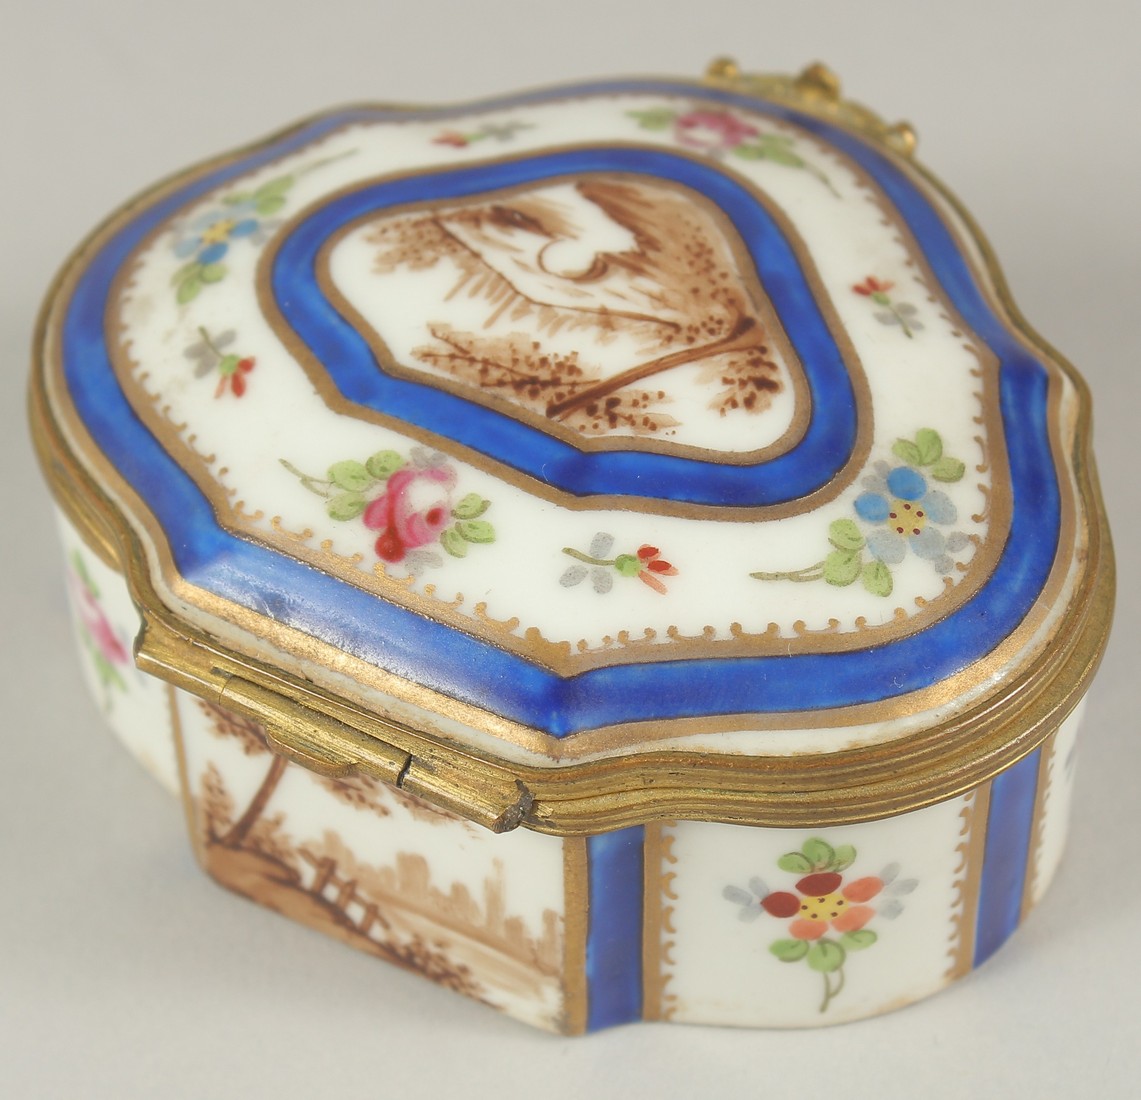 A SMALL SEVRES PORCELAIN PILL BOX AND COVER with blue and white decoration and roses. 3ins wide.